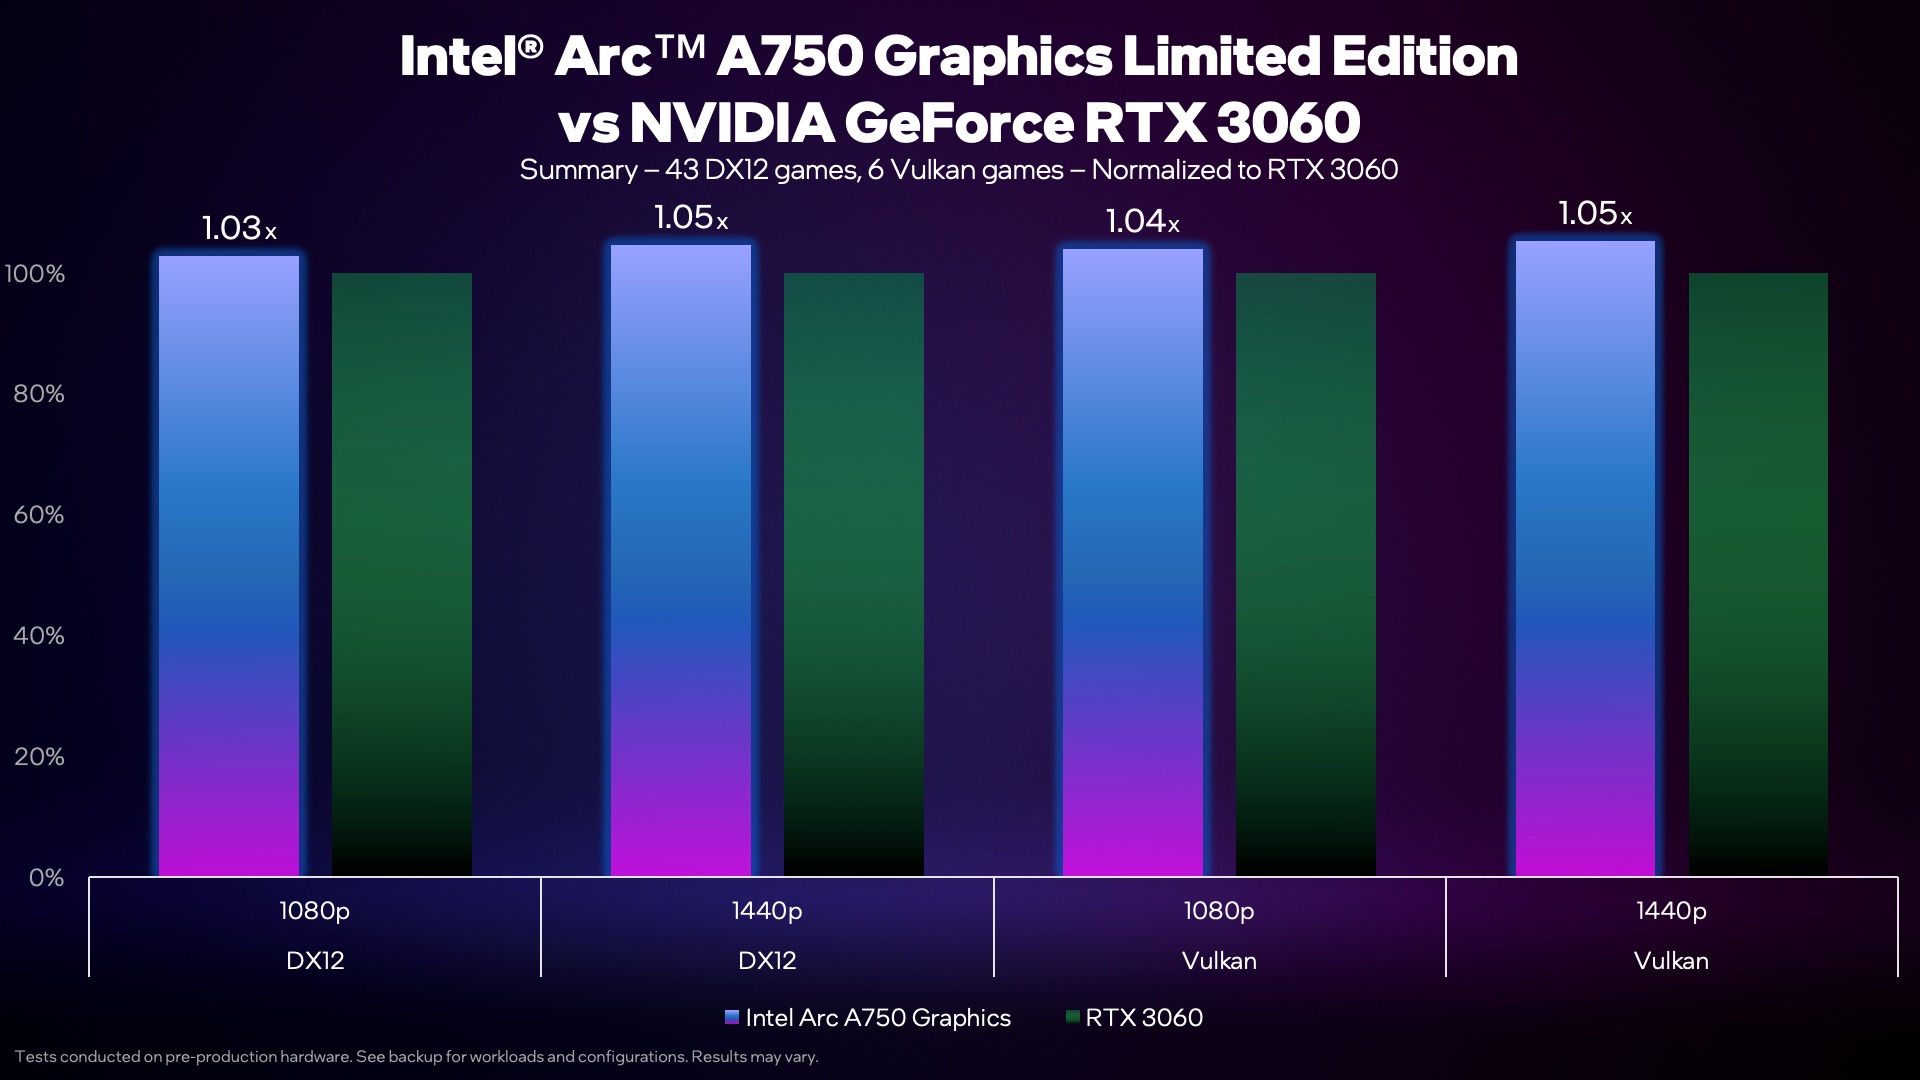 Intel reveals ARC A750 gaming performance in 48 DX12 & Vulkan